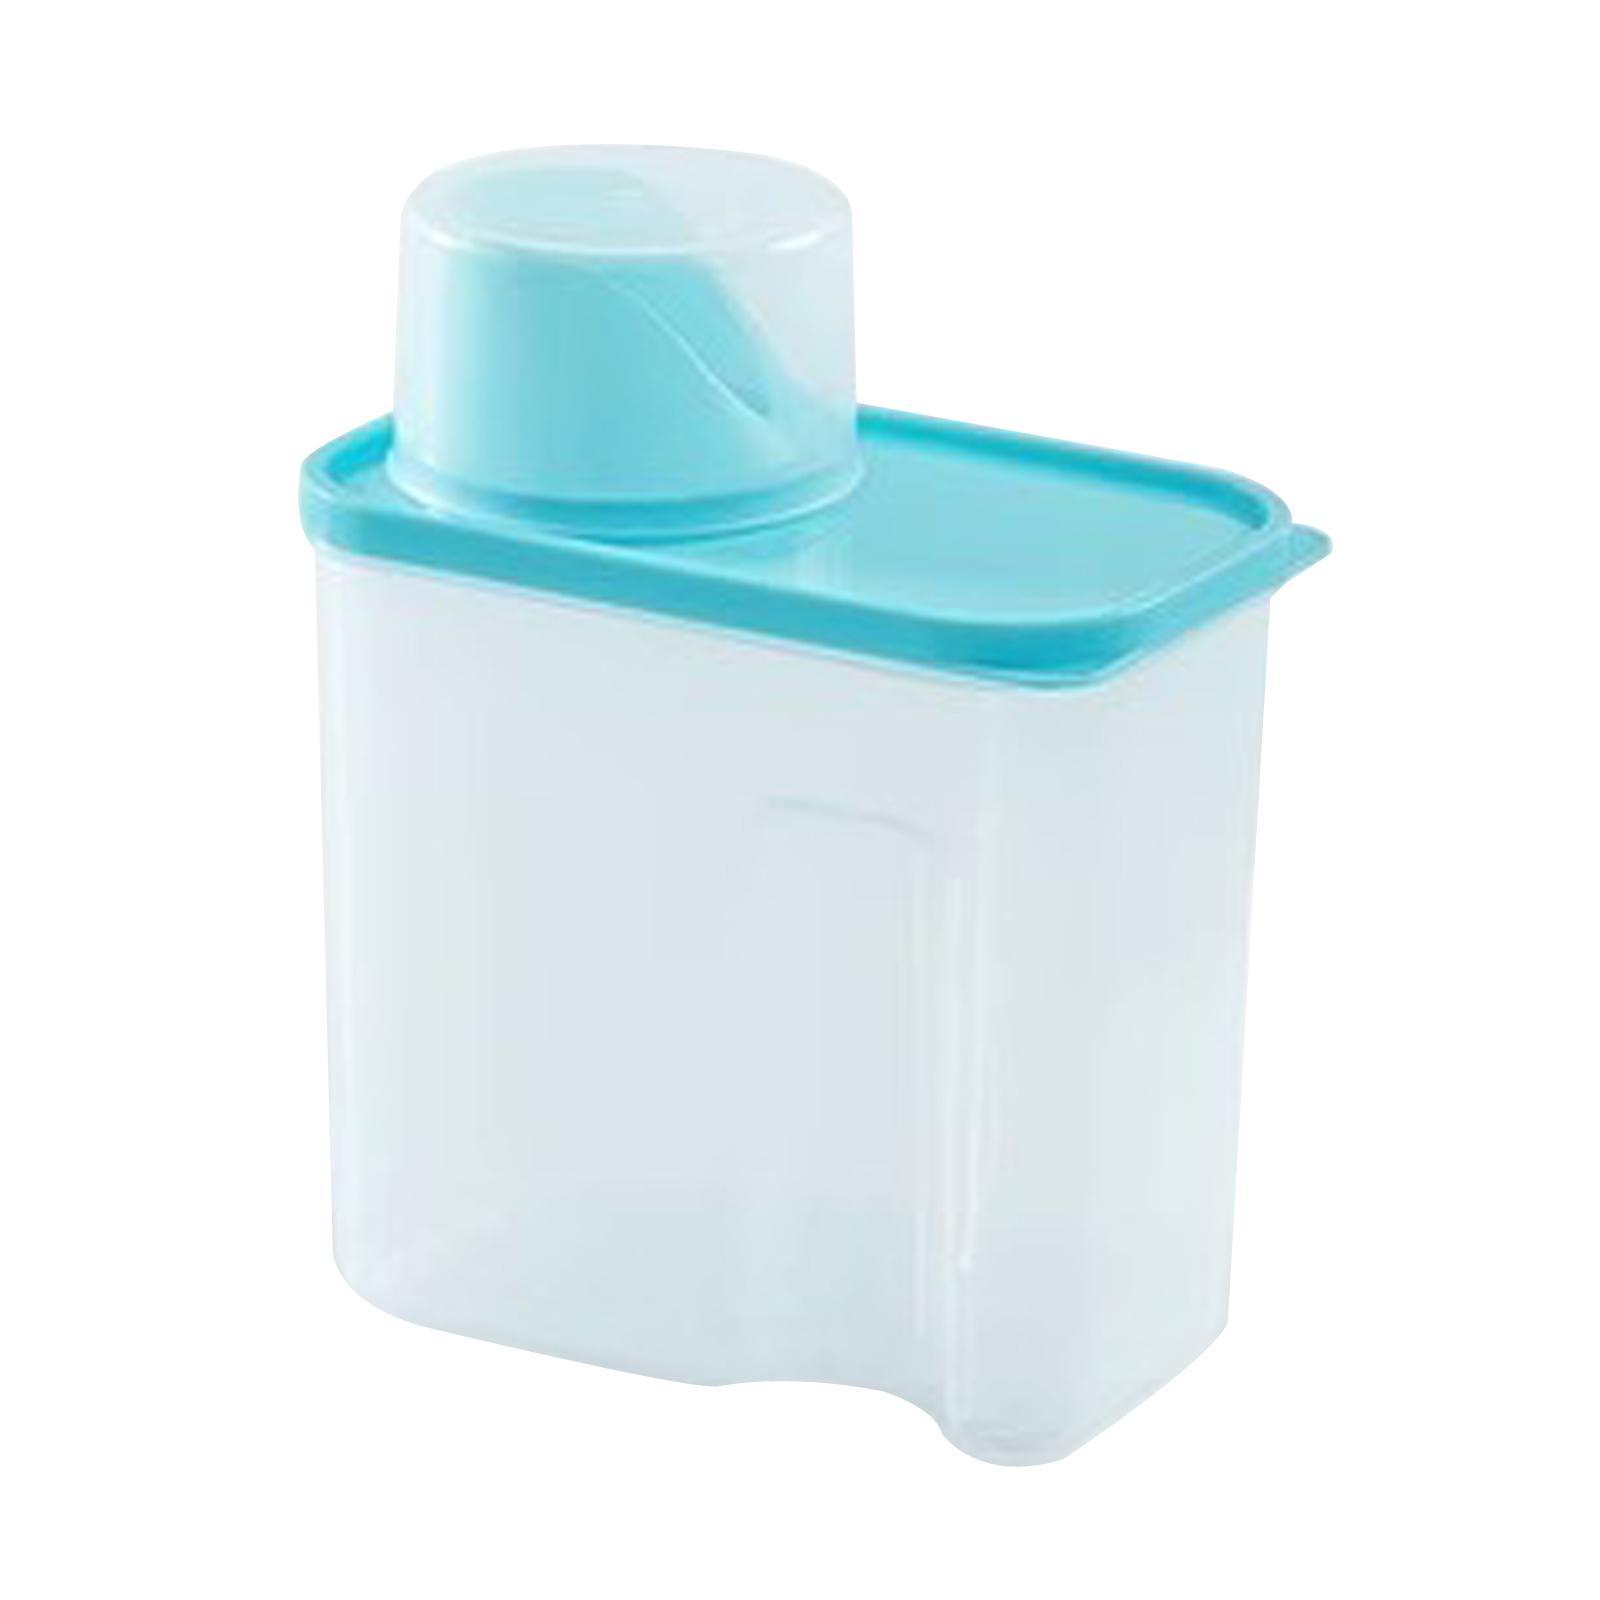 Washing Powder Containers Clear Laundry Powder Storage Box for Closet Cabinet